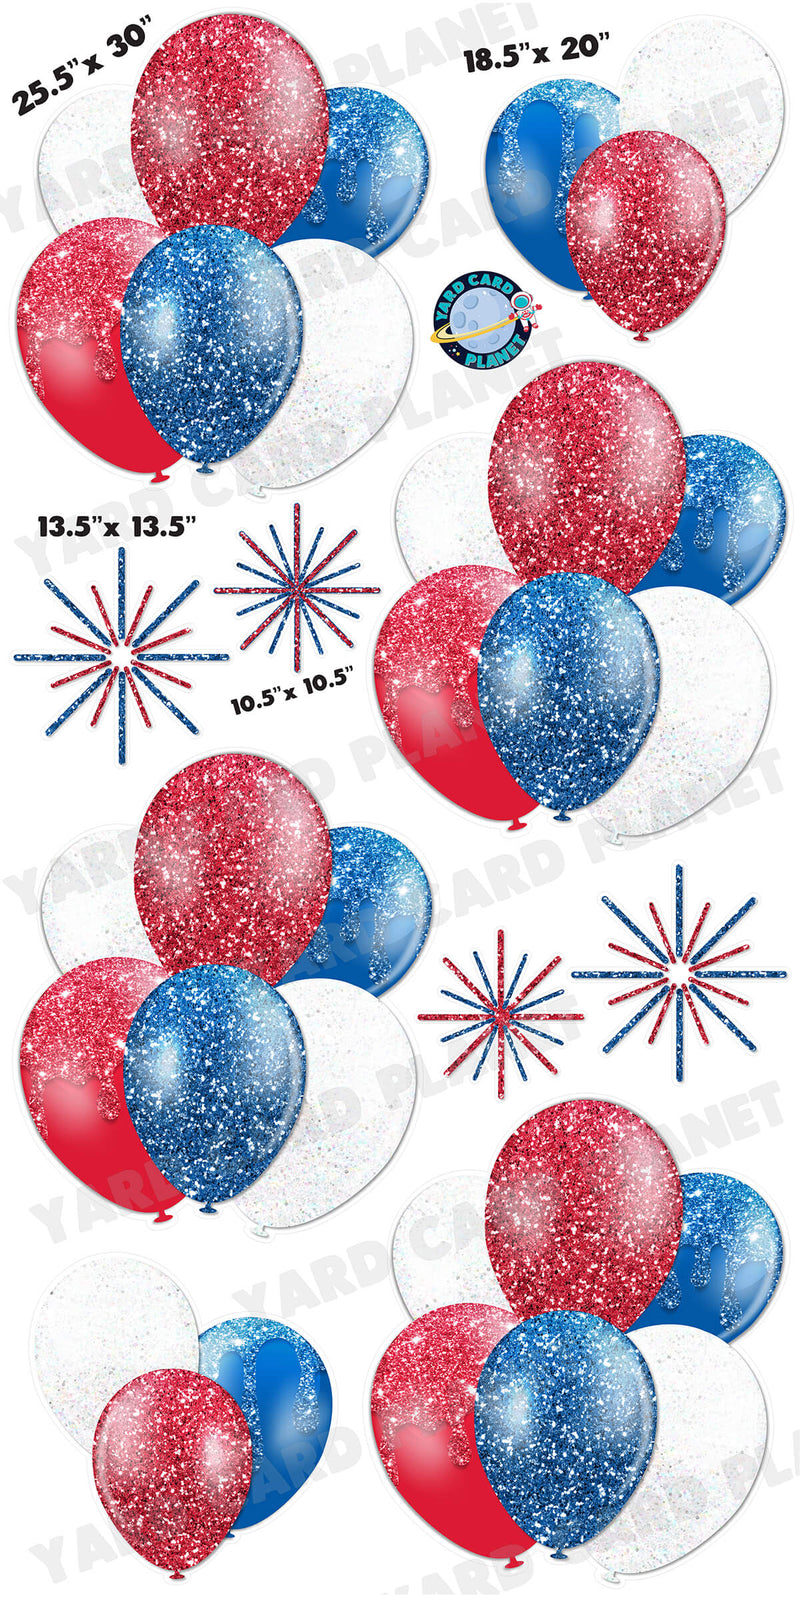 Red, White and Blue Glitter Balloon Bouquets and Starbursts Yard Card Set with Measurements